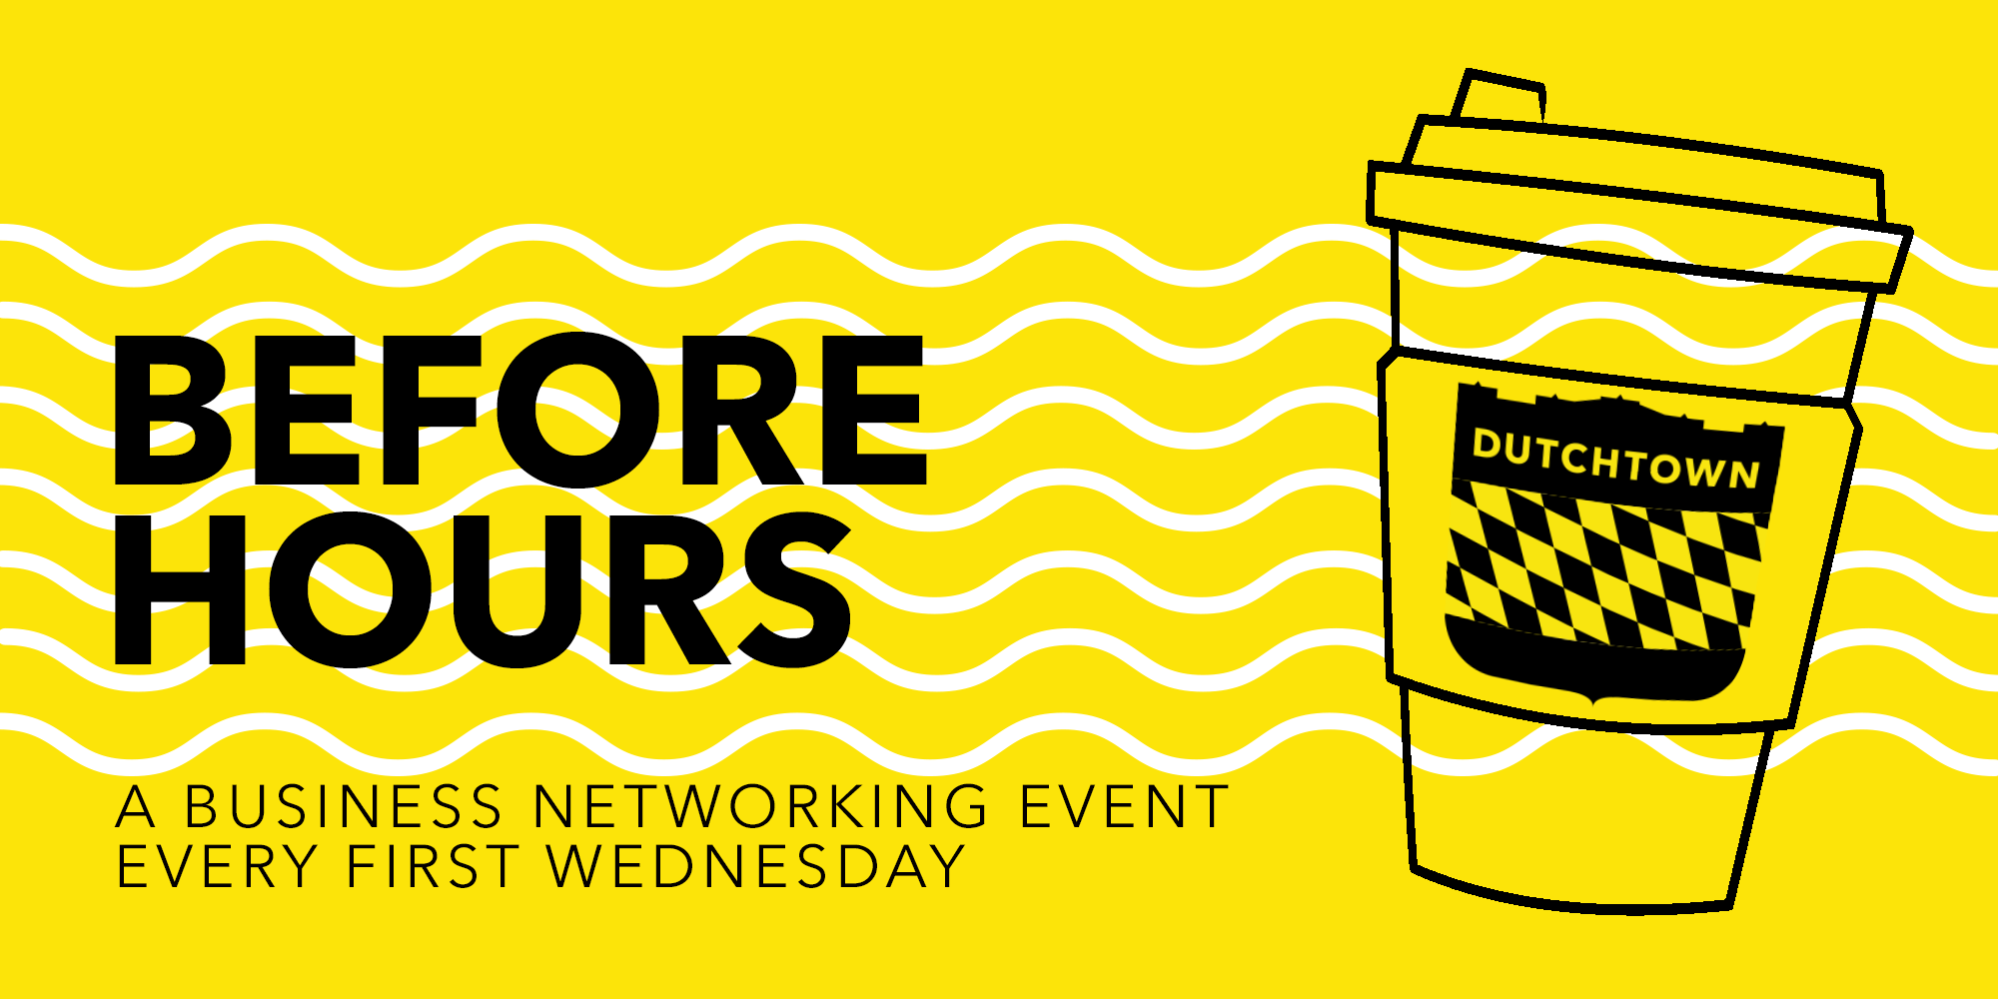 Before Hours: A business networking event every first Wednesday.